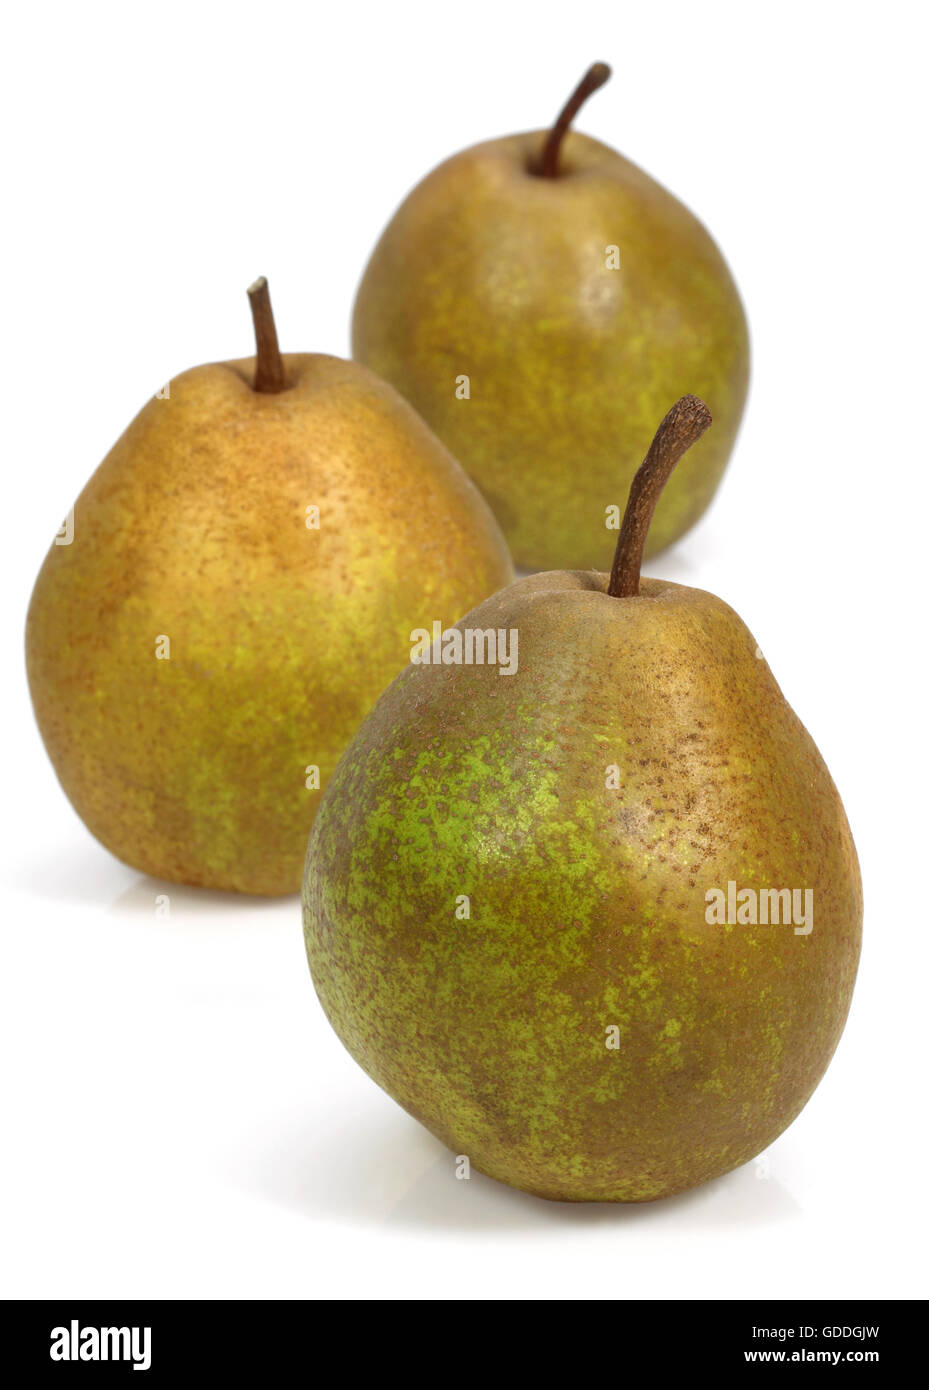 BEURRE HARDY PEAR pyrus communis AGAINST WHITE BACKGROUND Stock Photo